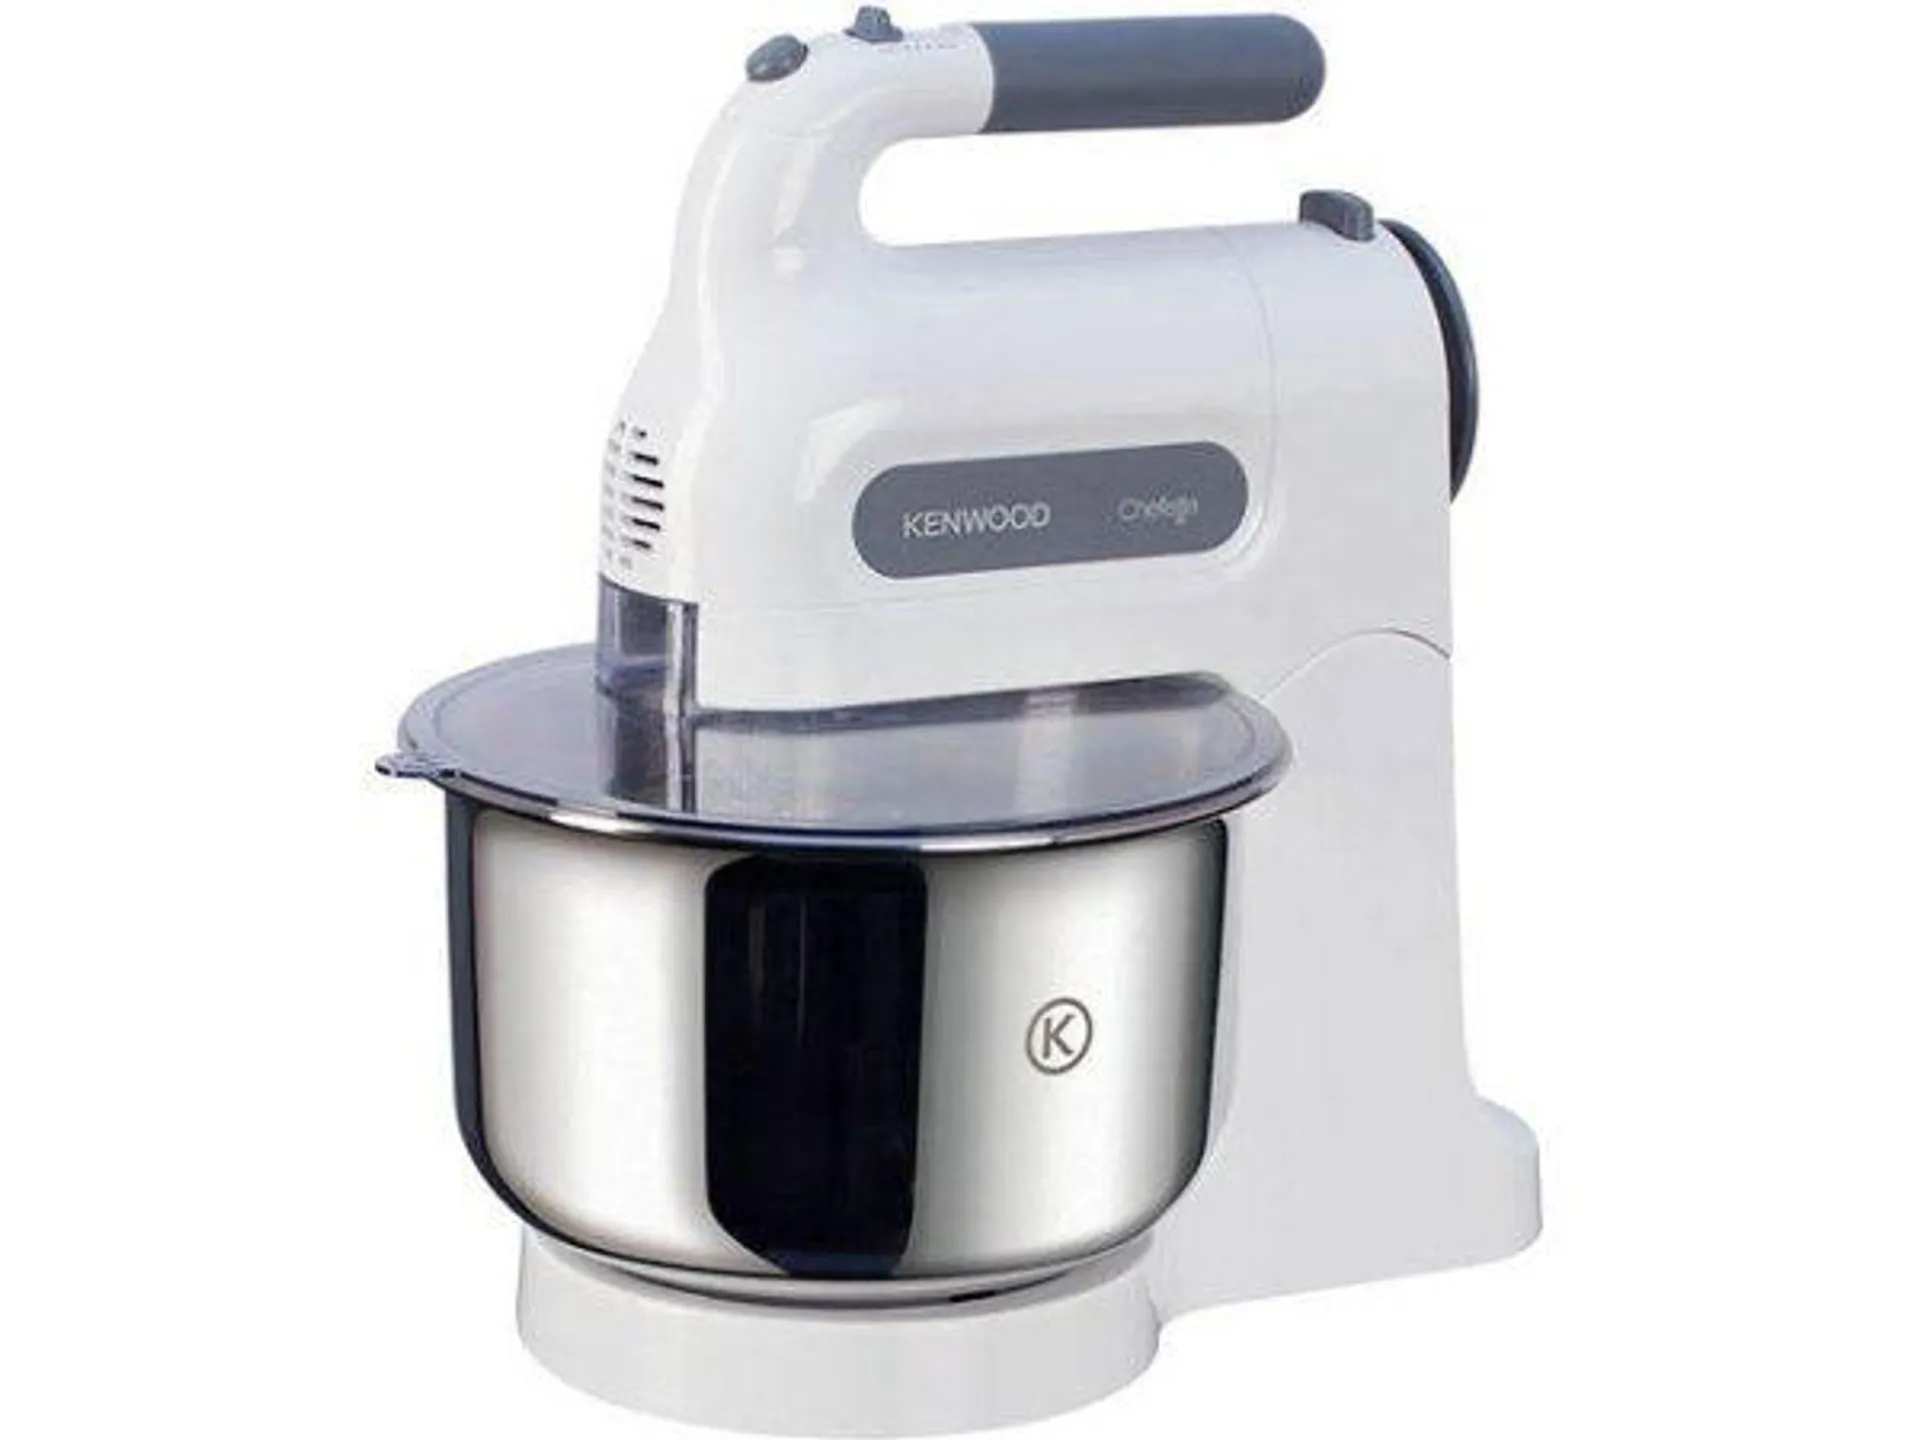 Kenwood Chefette Hand Mixer and Bowl